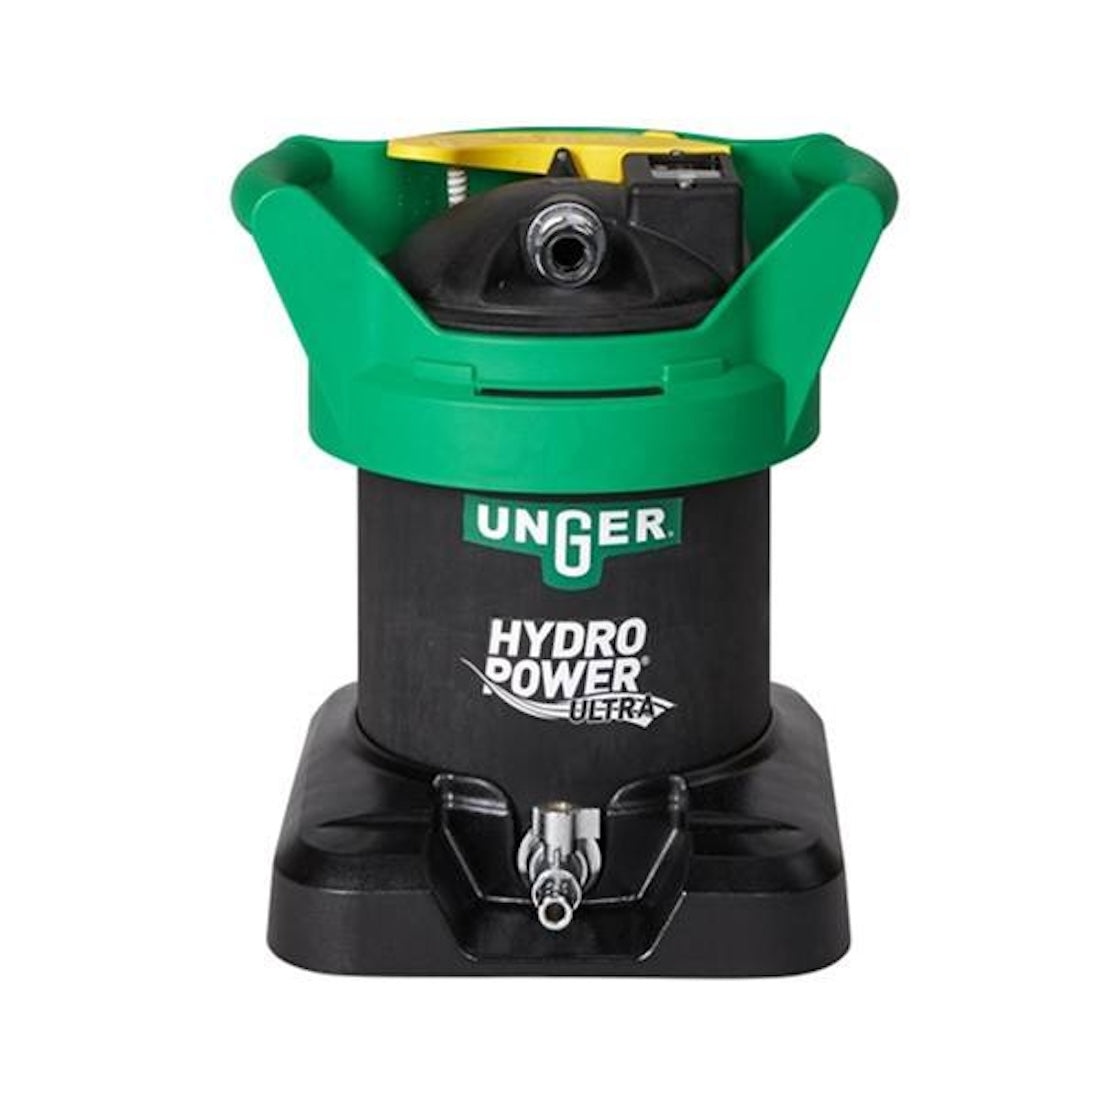 Unger HydroPower Ultra Entry Kit - 20 Feet System View